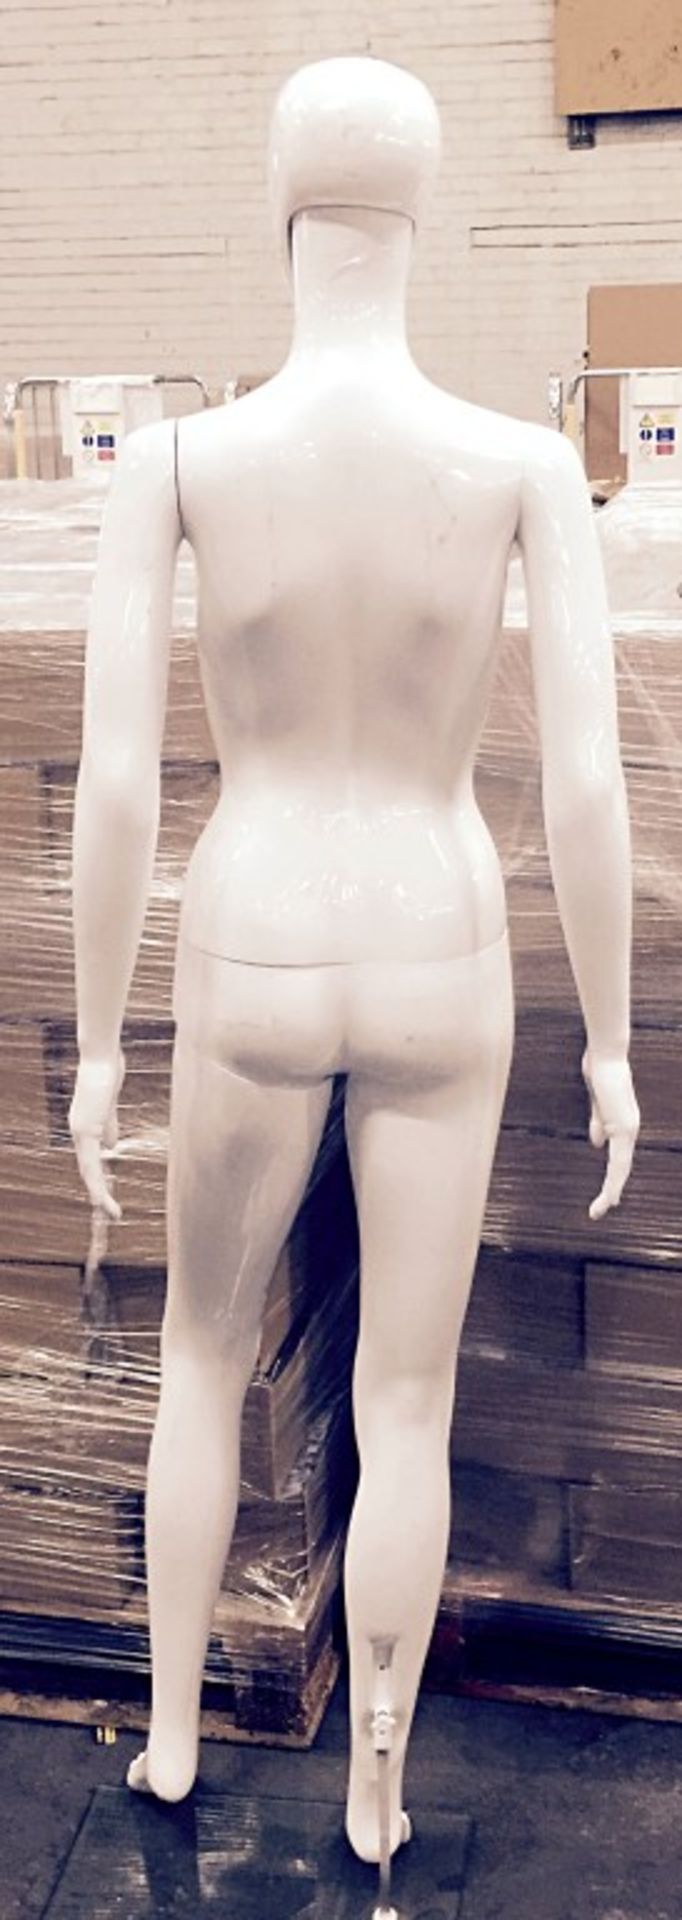 1 x Female Full Body Mannequin – Life Size Faceless Adult Form With Adjustable Head and Arms – White - Image 3 of 4